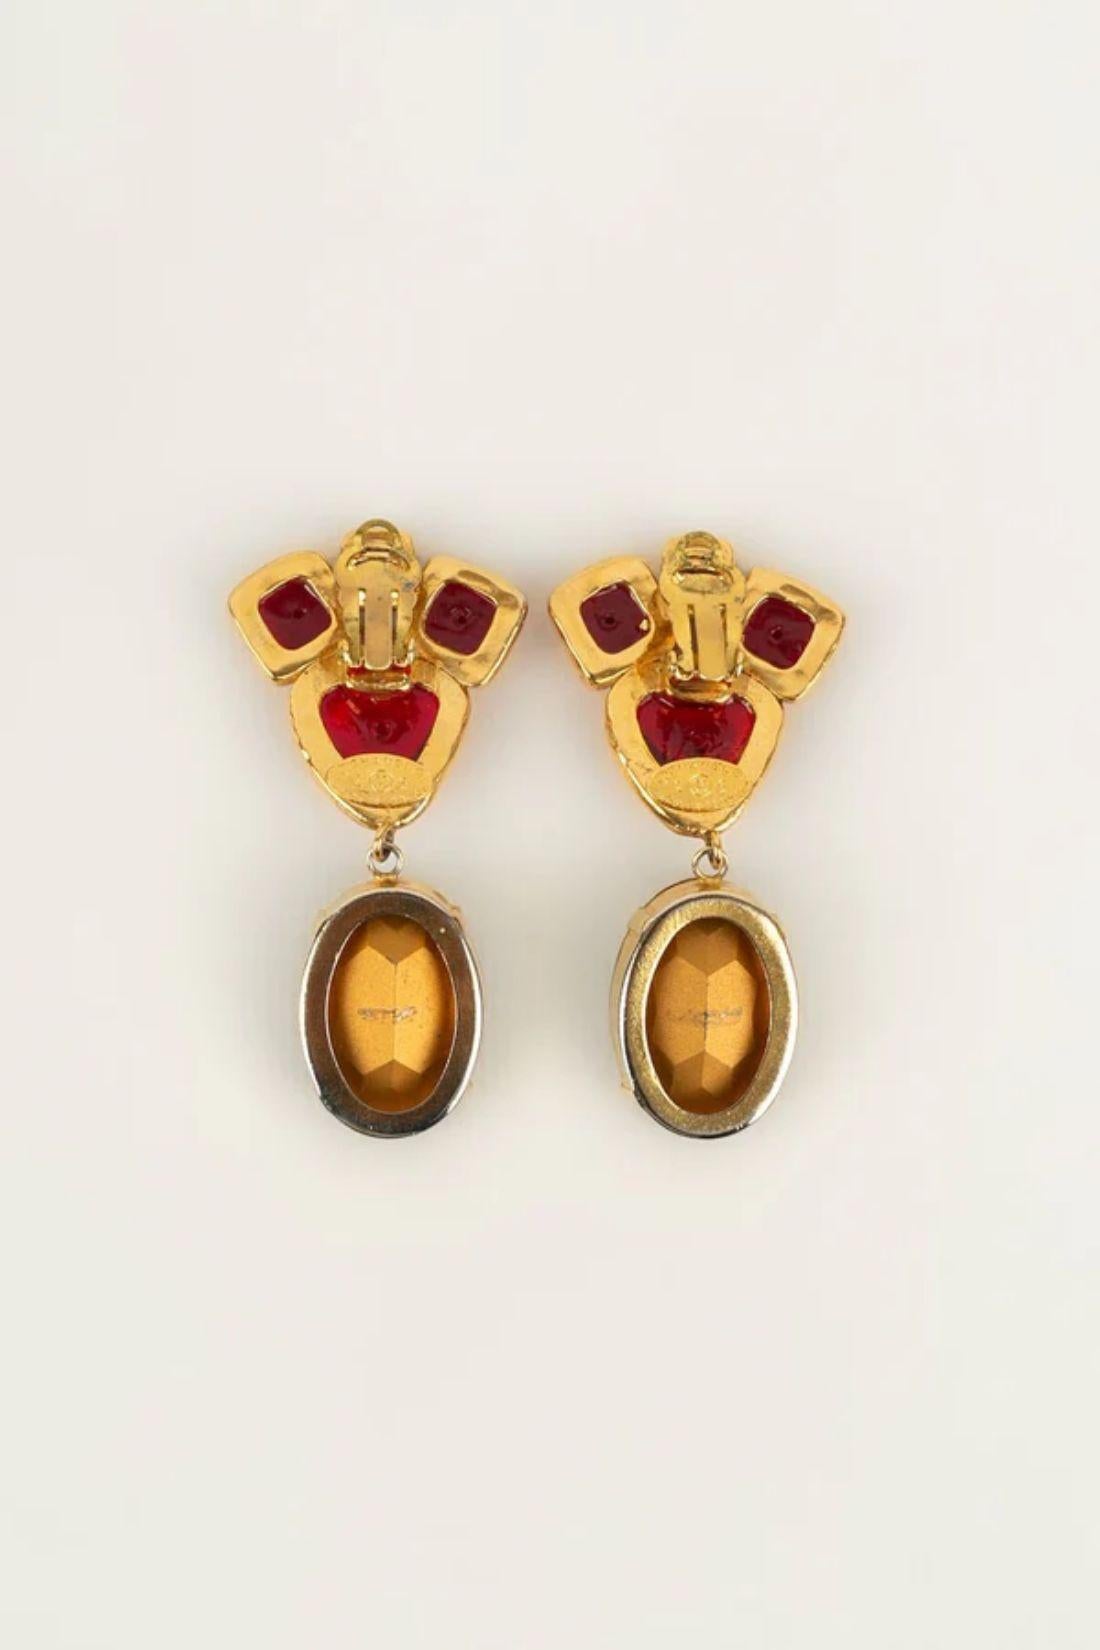 Chanel - (Made in France) Earrings in gold metal and glass paste. Collection 2cc6.

Additional information:
Dimensions: 7 L cm
Condition: Very good condition
Seller Ref number: BOB85